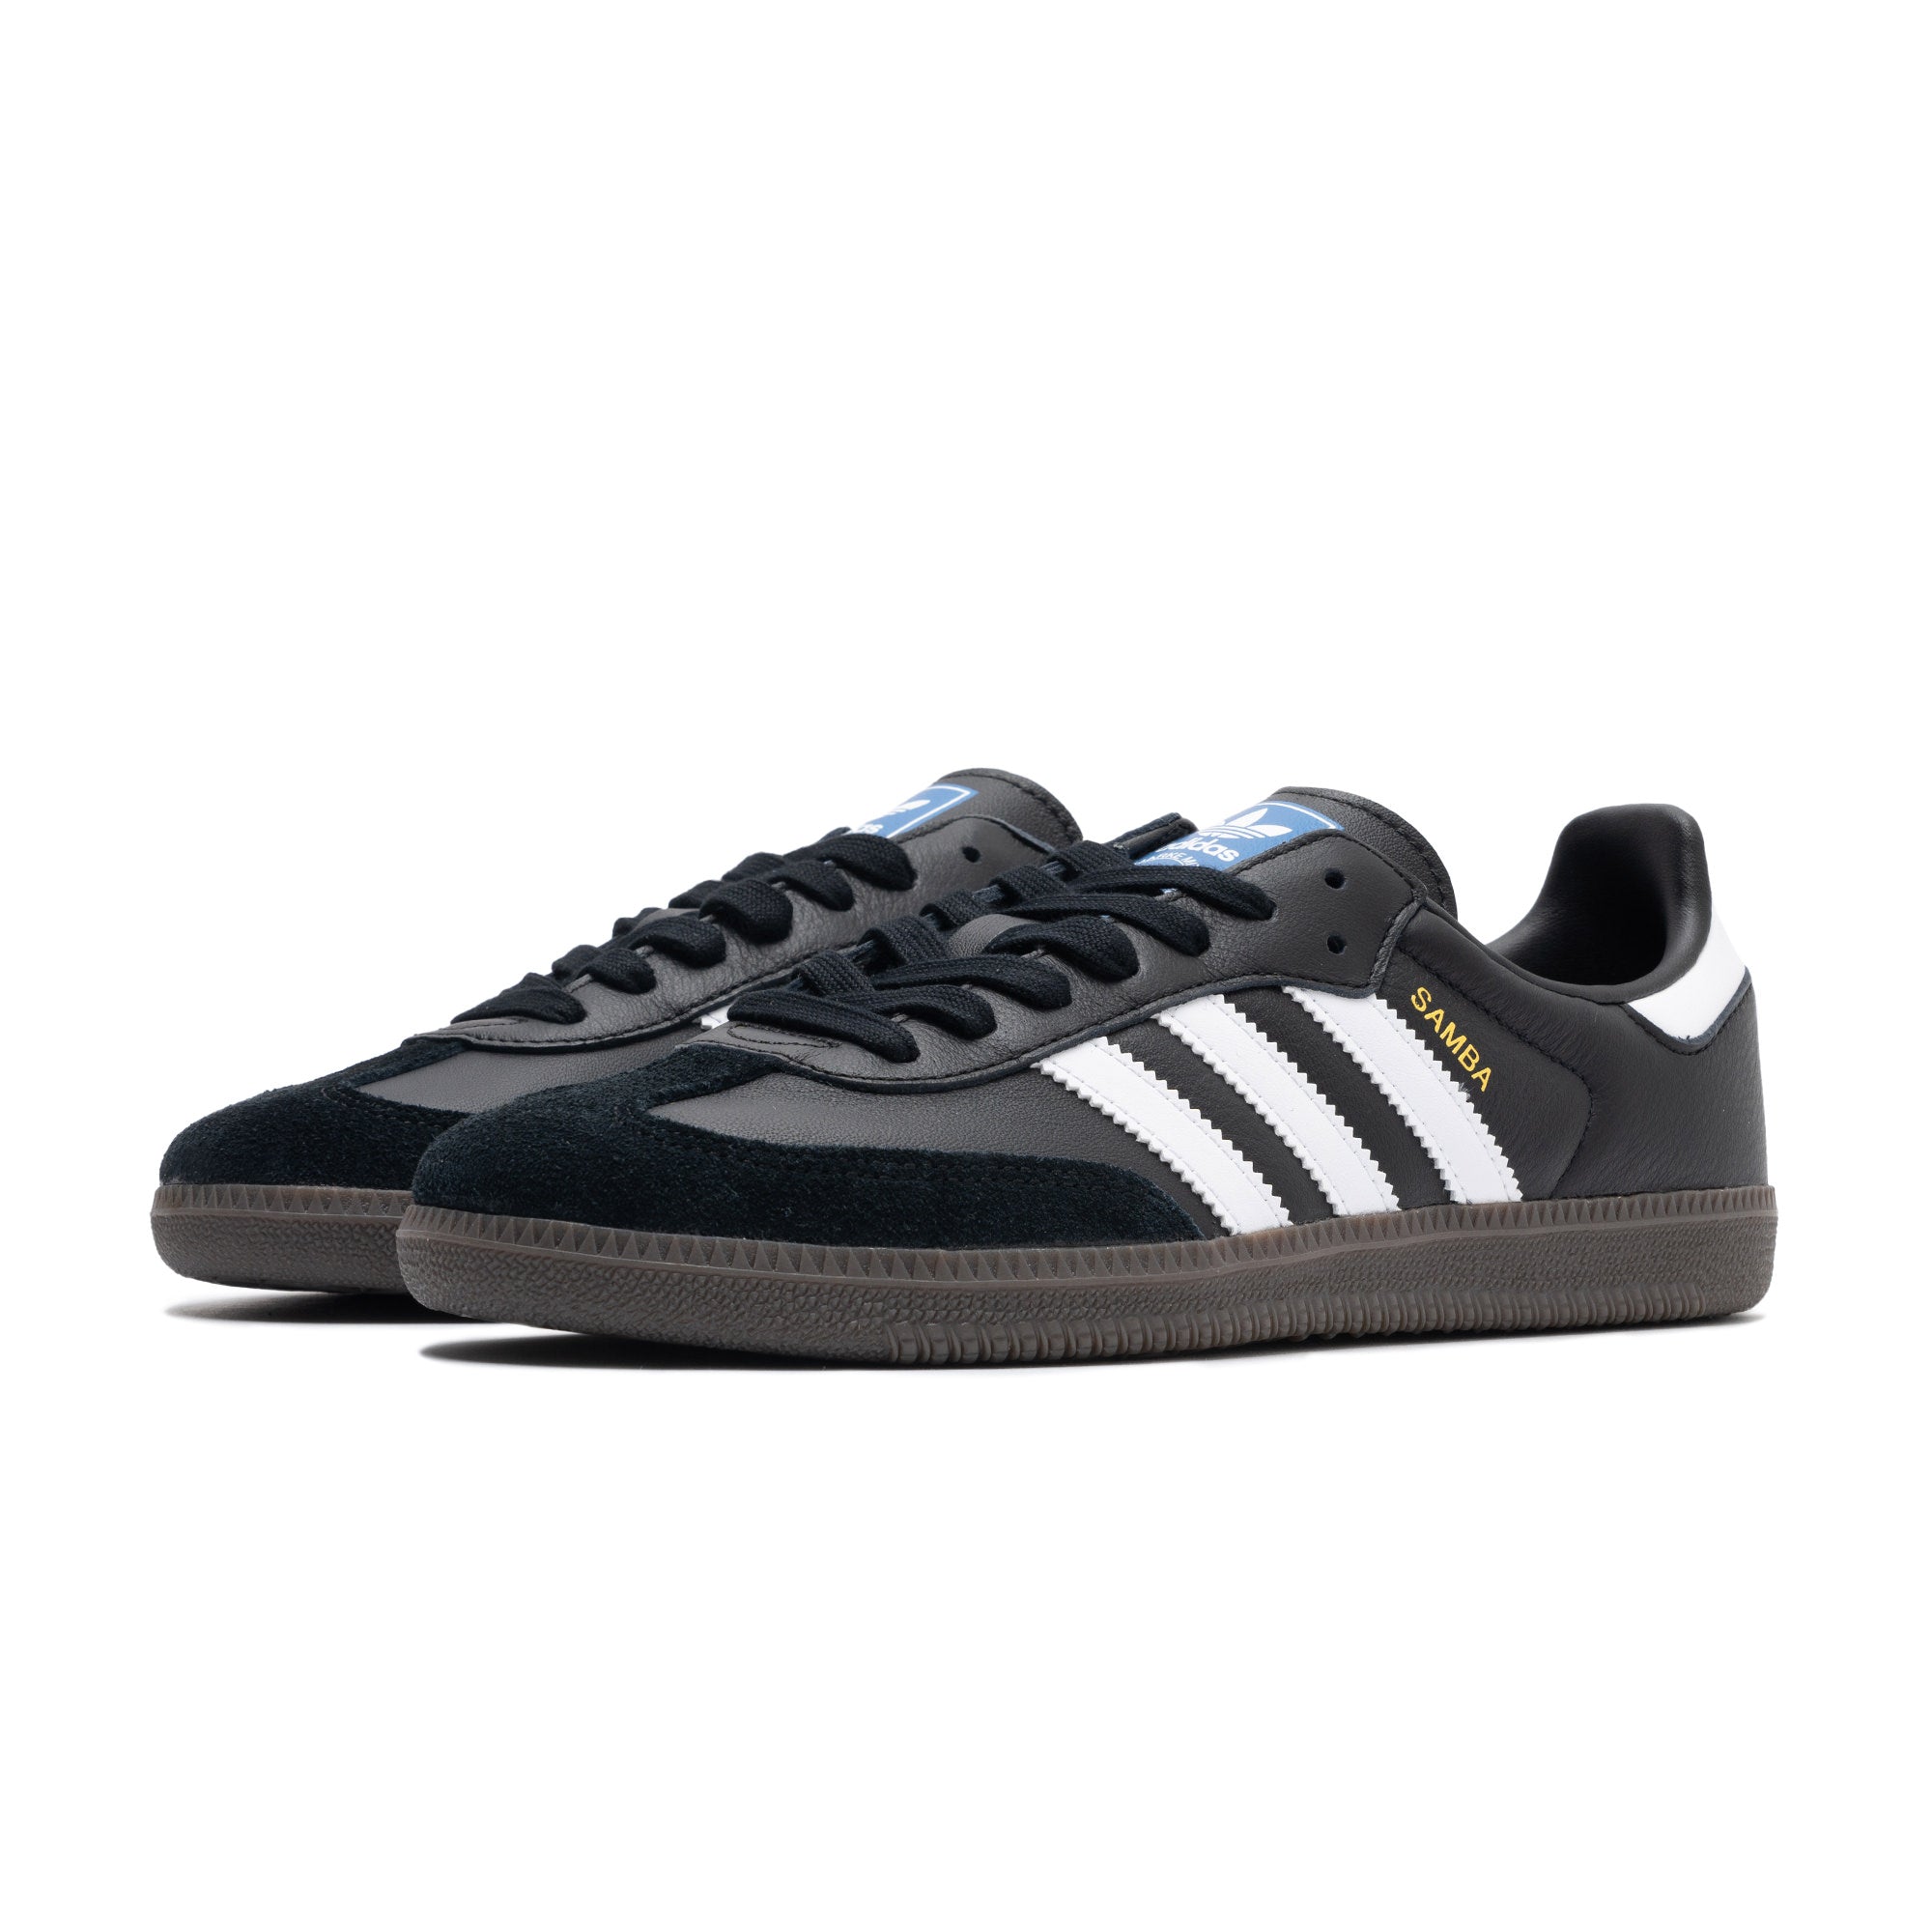 thesia sneakers adidas originals shoes ftwwht ftwwht ftwwht